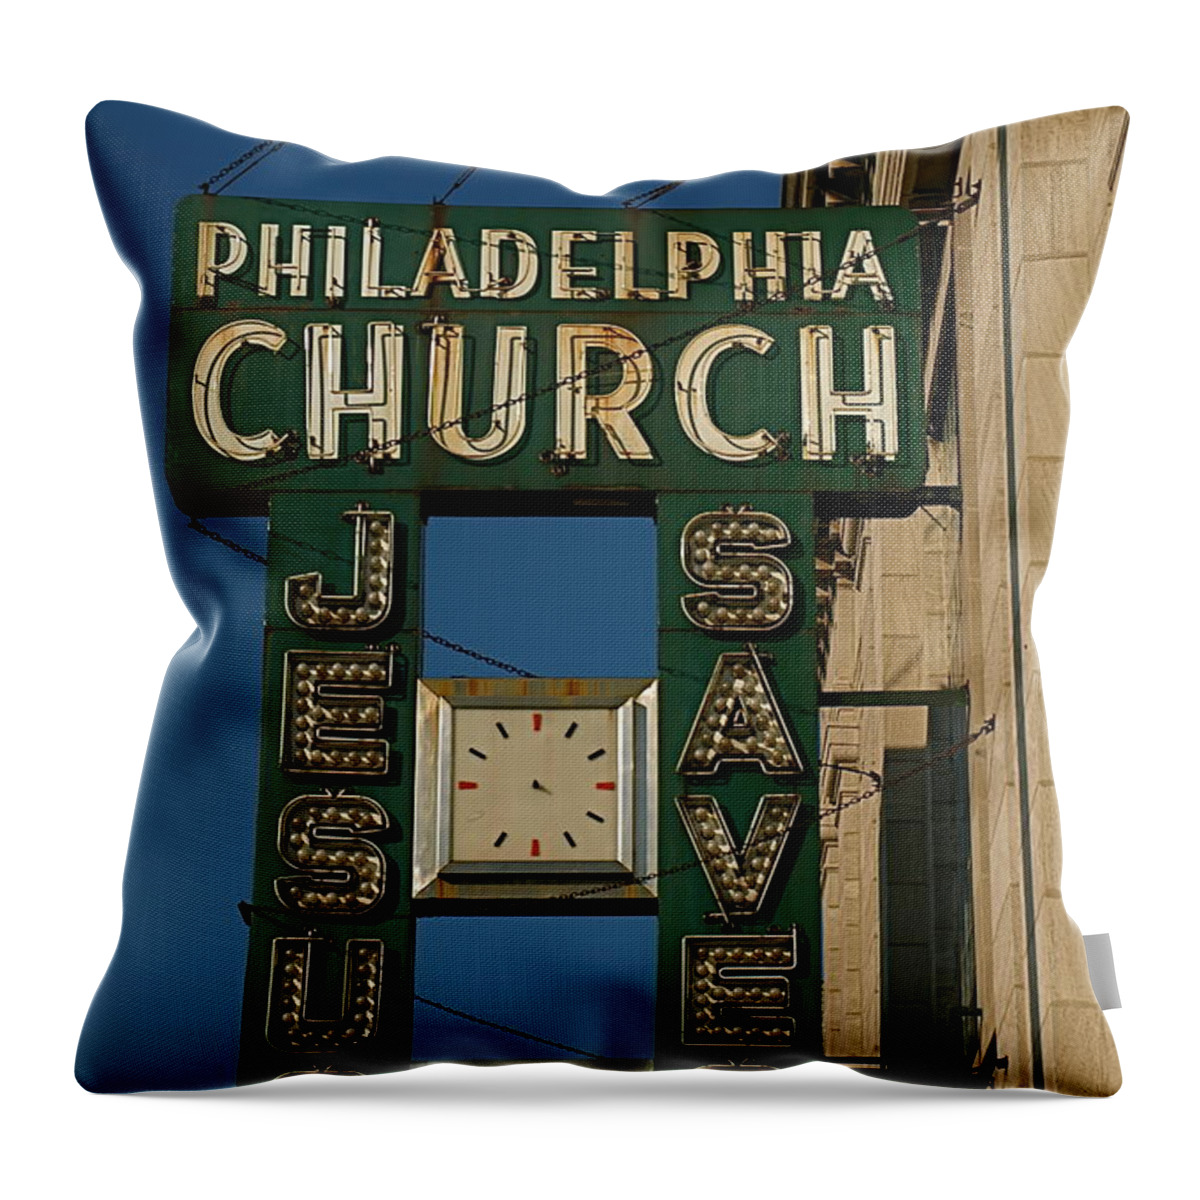 Philadelphia Church Throw Pillow featuring the photograph Jesus Saves by Gia Marie Houck